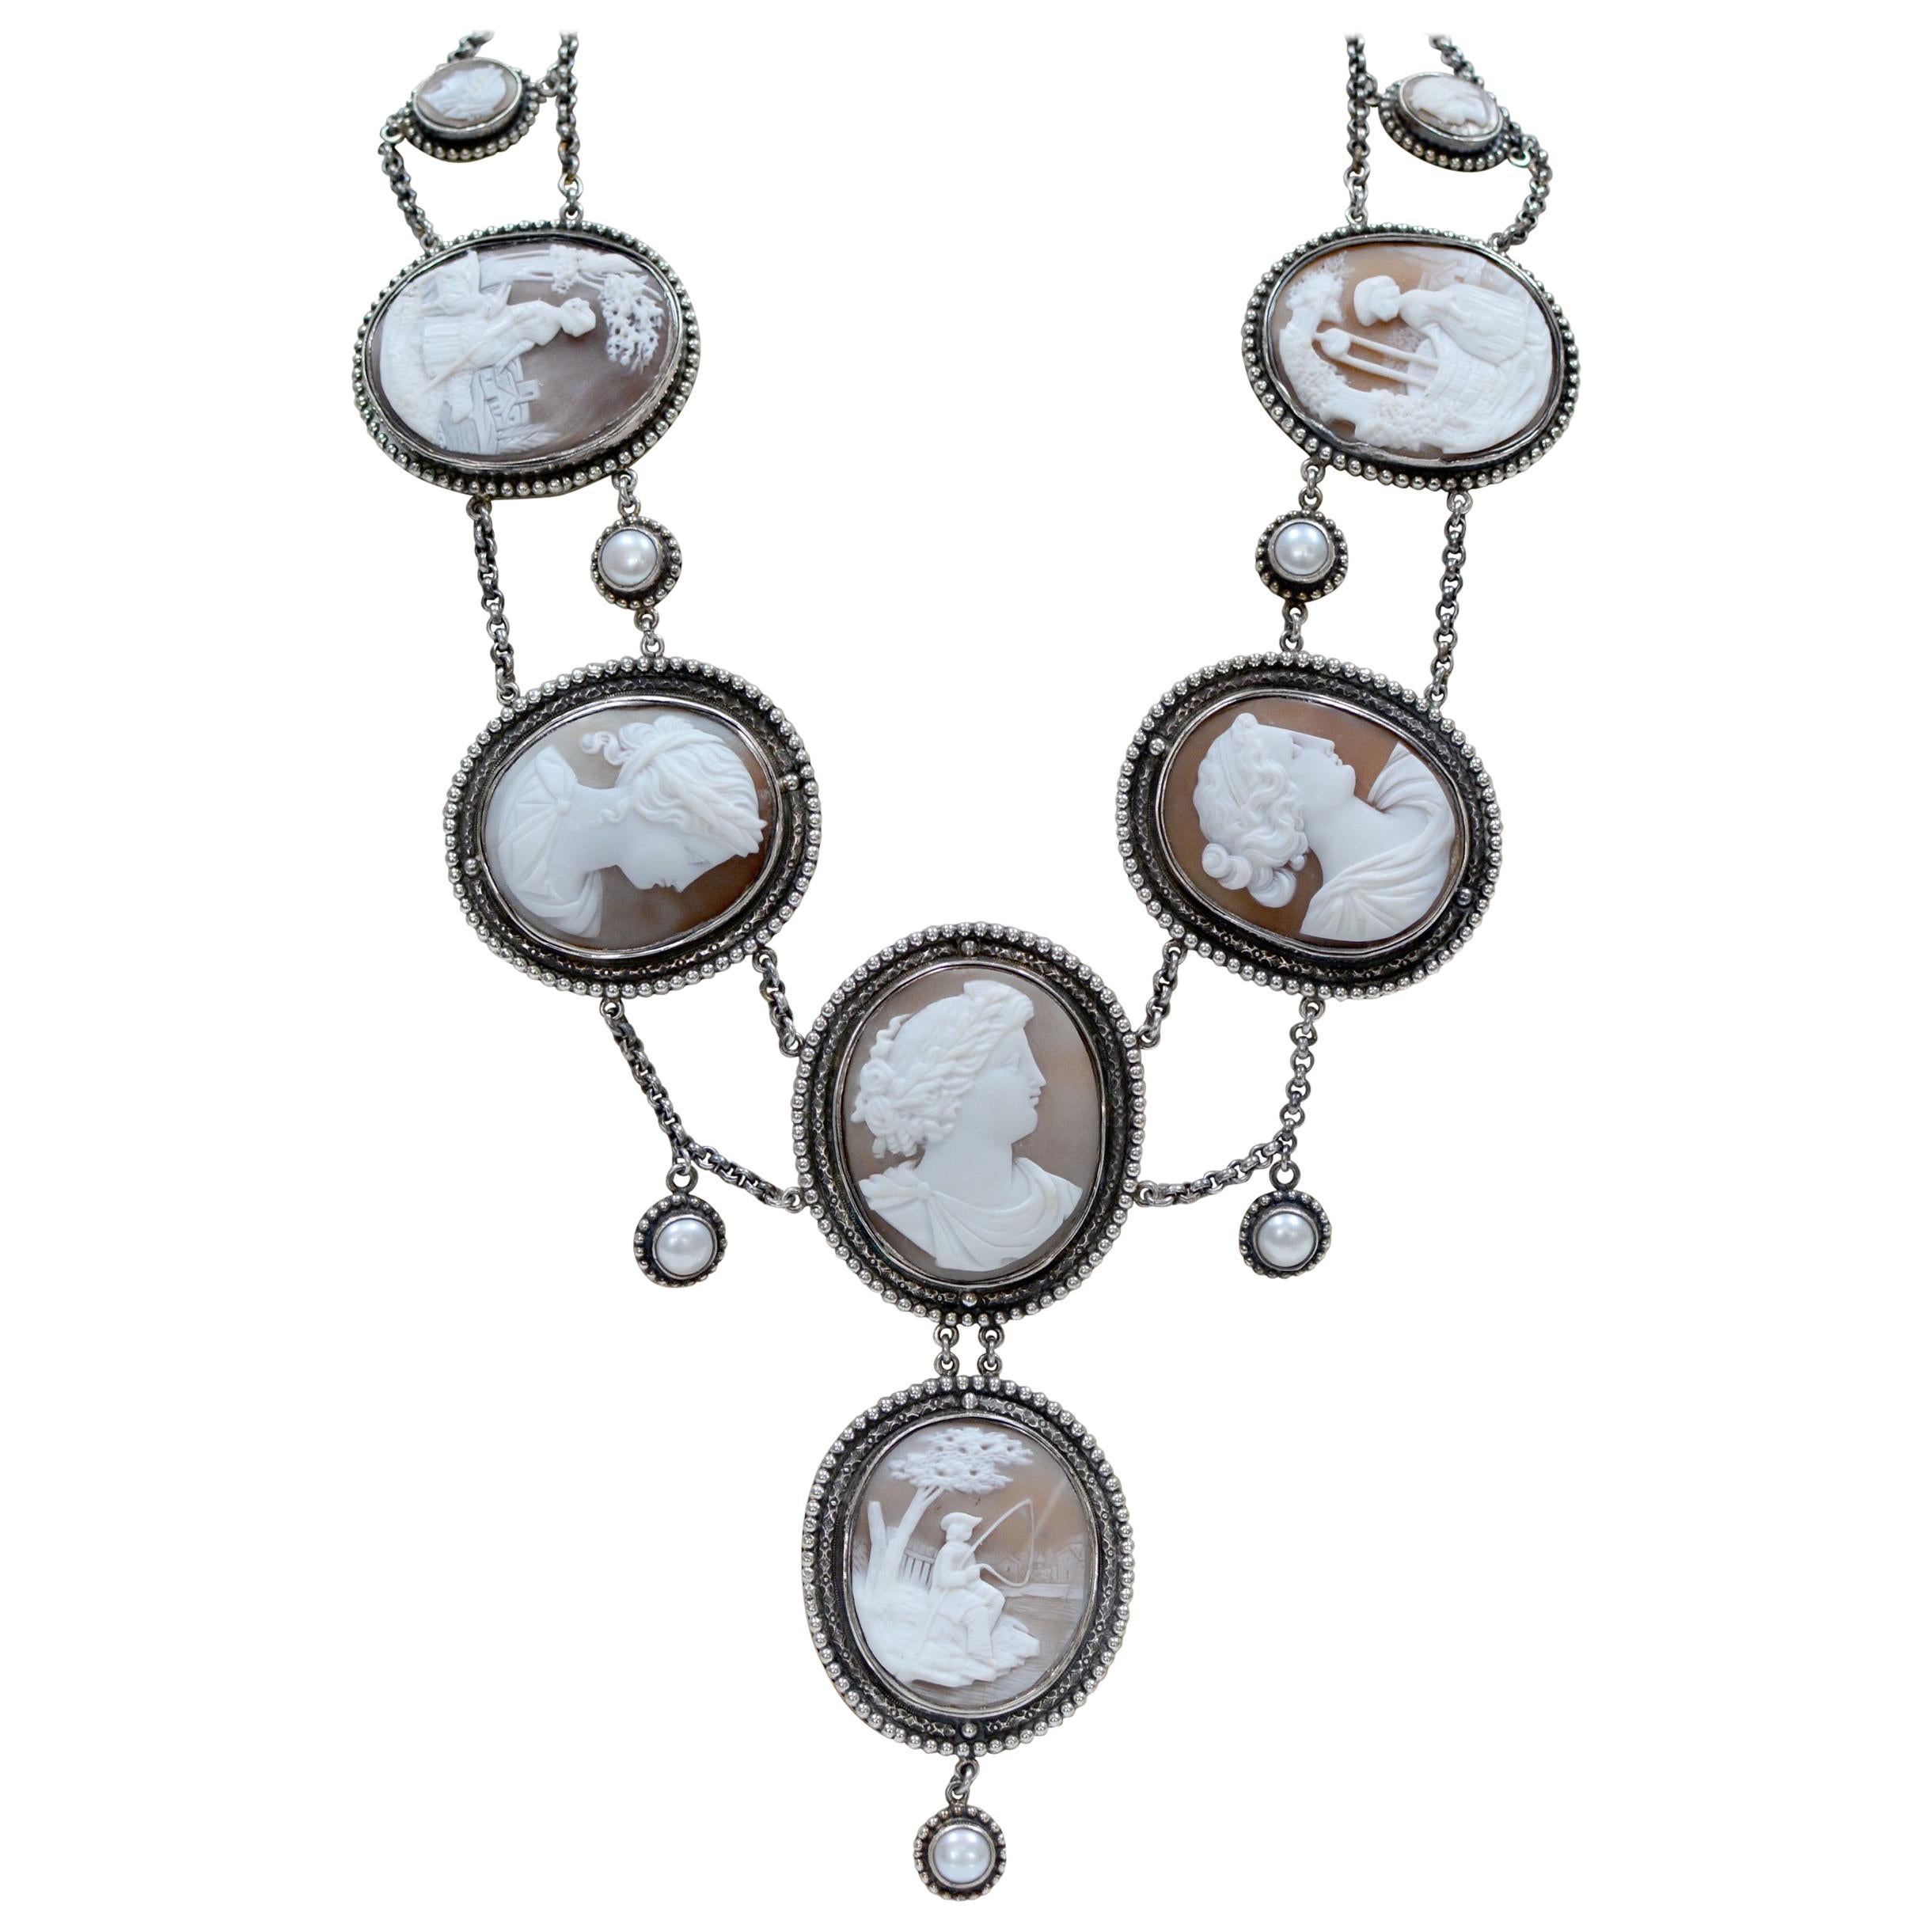 Jill Garber Elizabethan Style Necklace of the Gods with 19th Century Cameo Suite